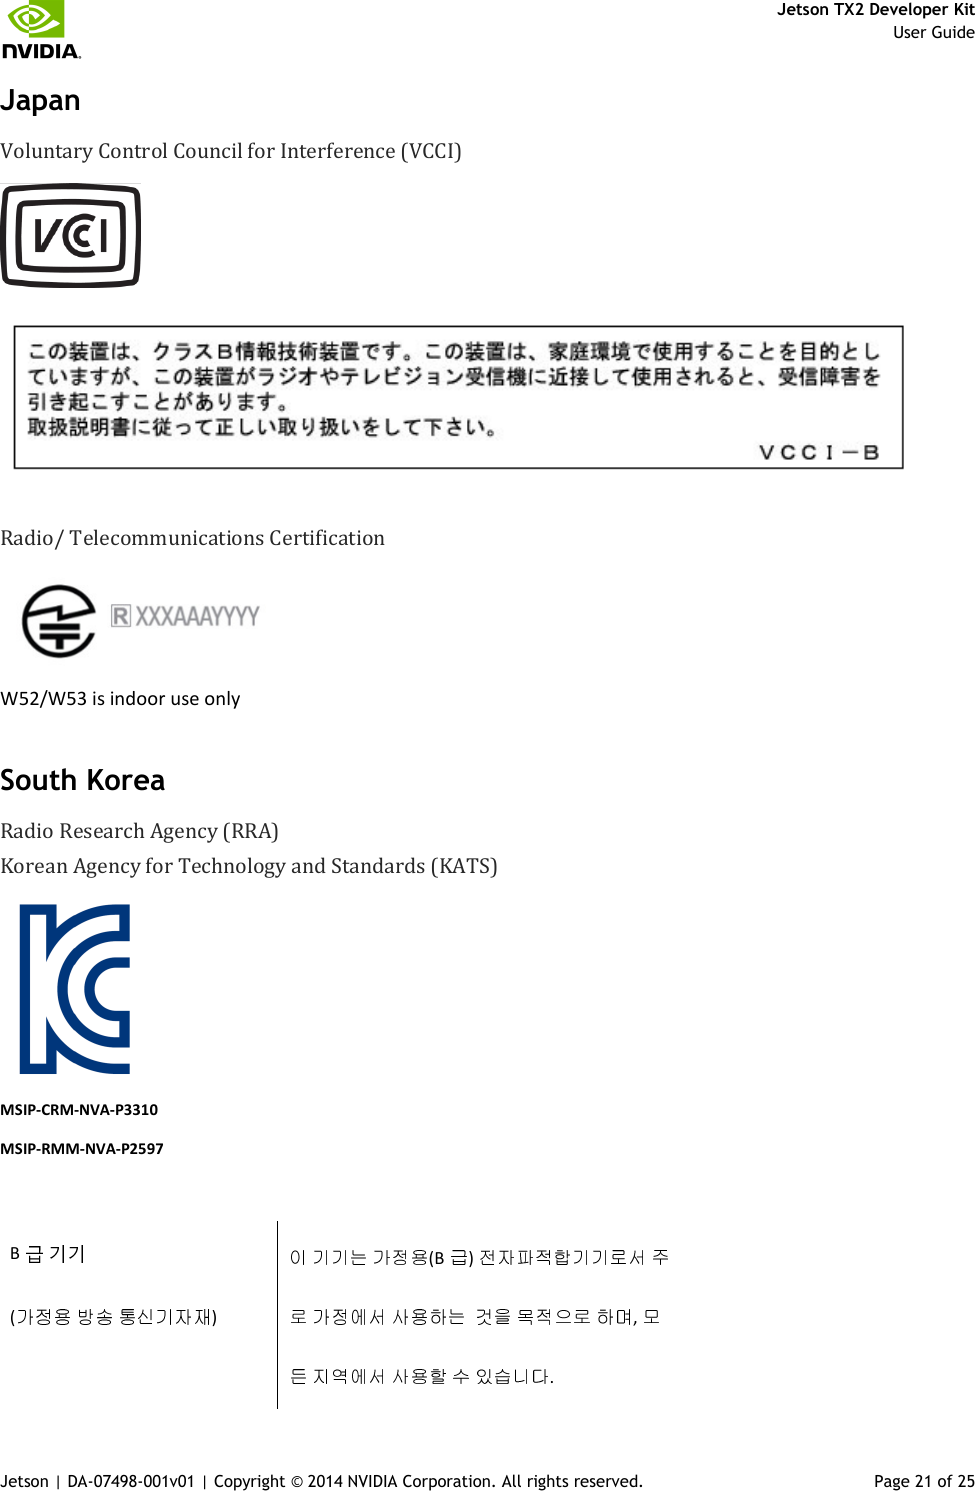     Jetson TX2 Developer Kit     User Guide Jetson | DA-07498-001v01 | Copyright © 2014 NVIDIA Corporation. All rights reserved.  Page 21 of 25 Japan Voluntary Control Council for Interference (VCCI)    Radio/ Telecommunications Certification   W52/W53 is indoor use only South Korea Radio Research Agency (RRA) Korean Agency for Technology and Standards (KATS)      MSIP-CRM-NVA-P3310 MSIP-RMM-NVA-P2597  B                    (B )     (     )             ,              . 